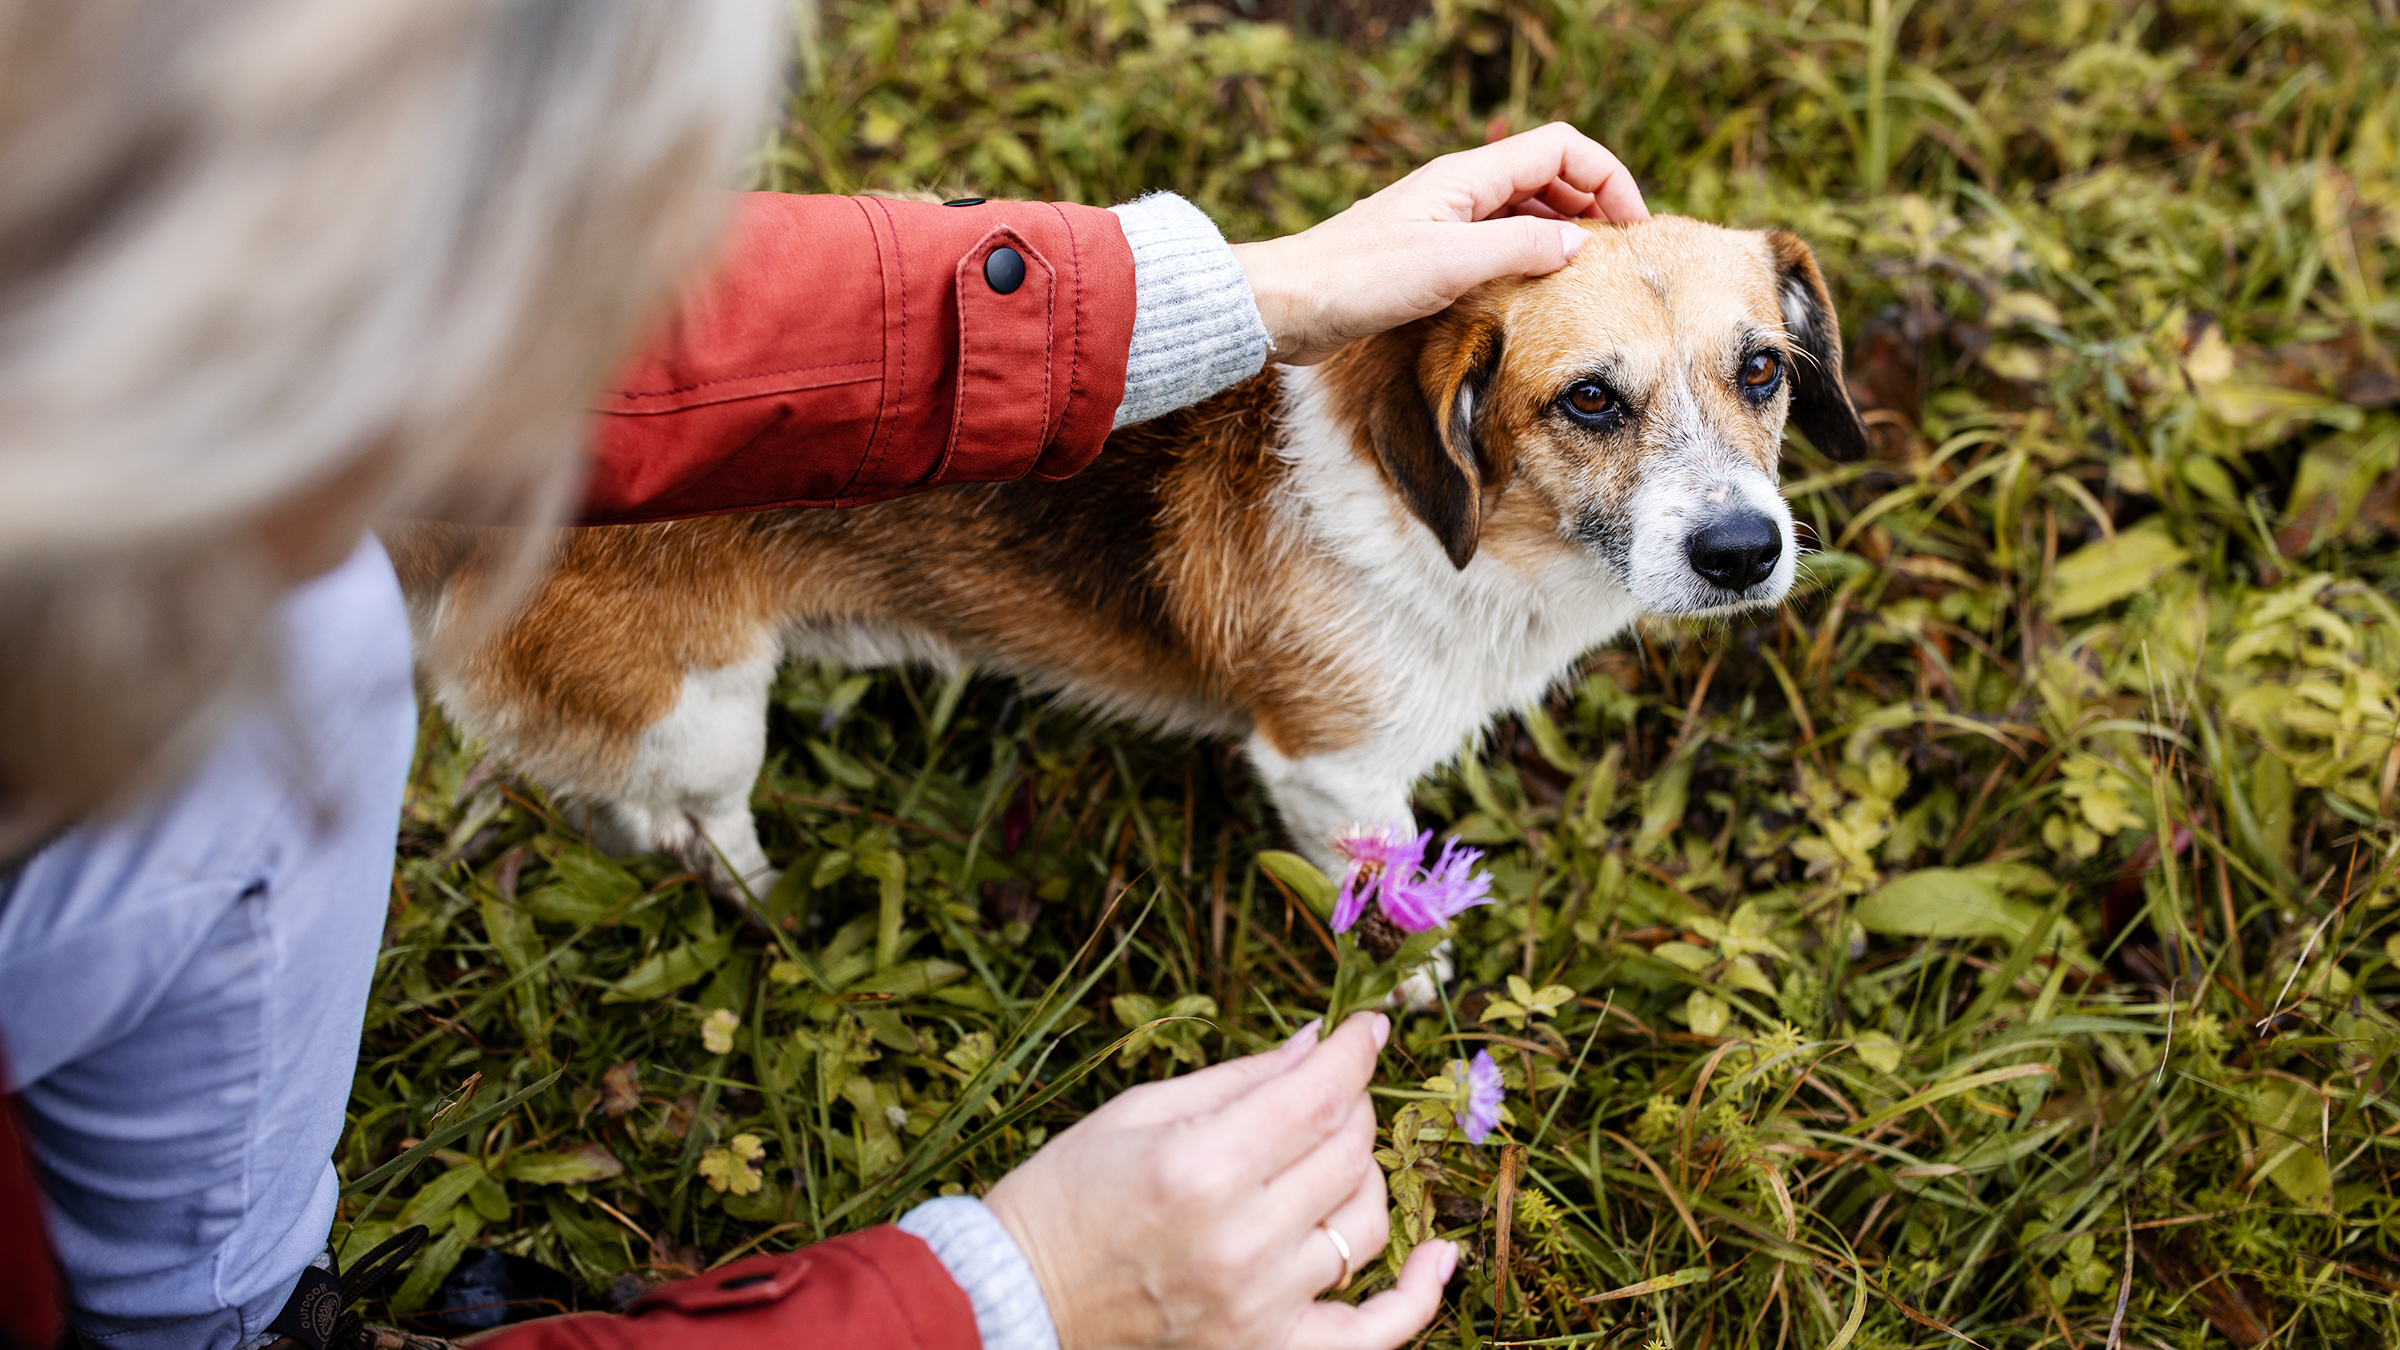 https://images.ctfassets.net/4f3rgqwzdznj/4wJAfjFAYzRb6kt3vf6RD/ae82478902baeb8d55af4e56a1cab981/woman_petting_dog_in_grass_1496122539.jpg